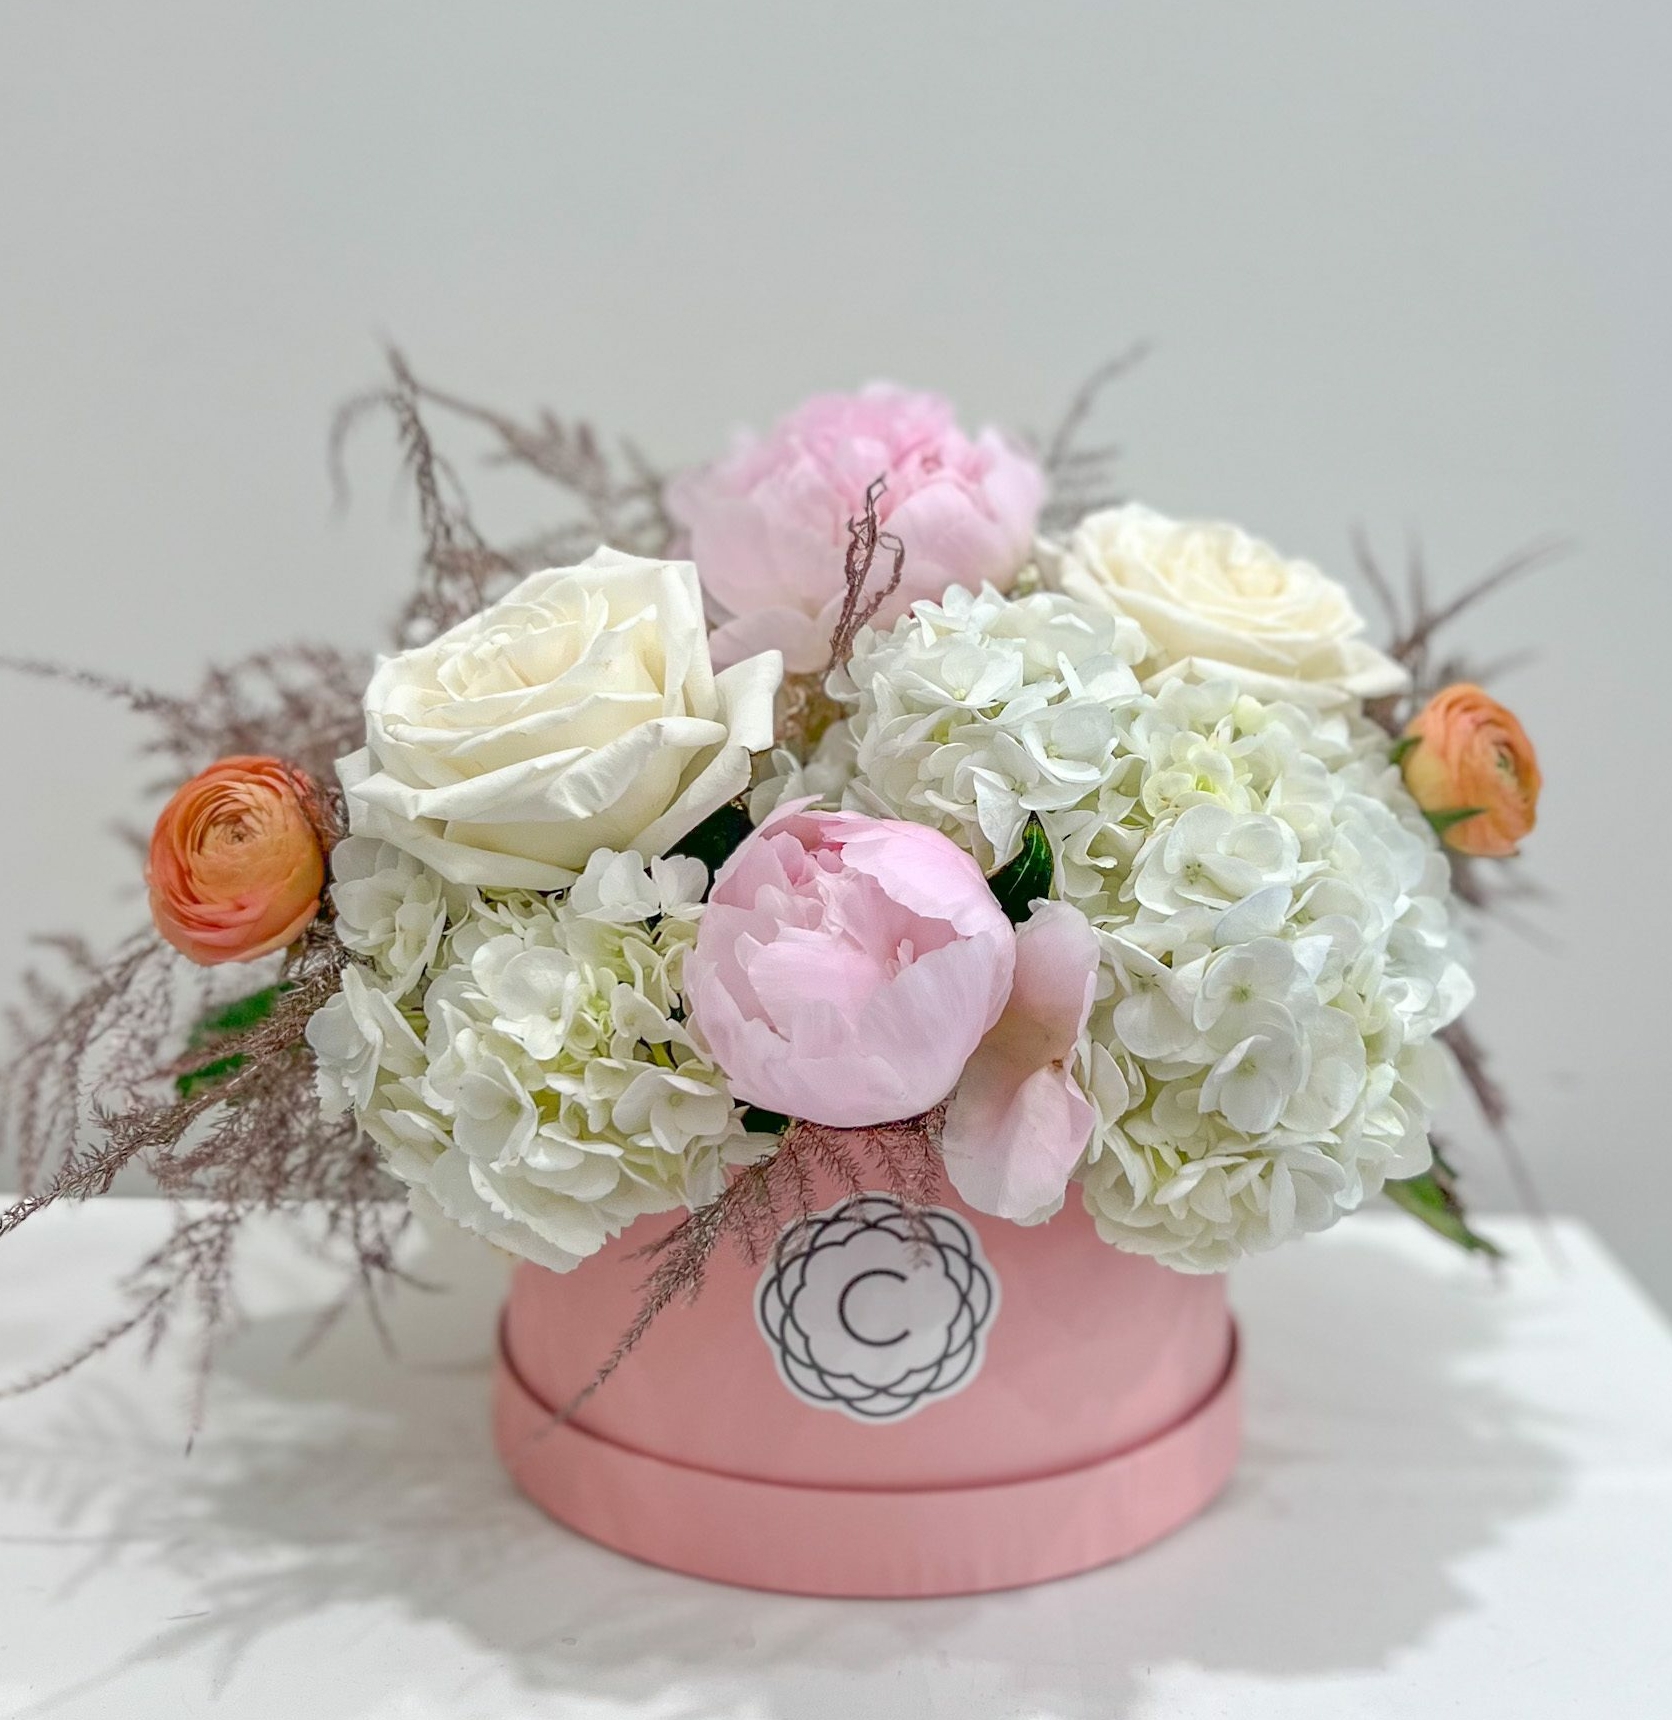 The Coco Chanel is an elegant arrangement full of white, blush and peach blooms designed into a stylish blush hat box